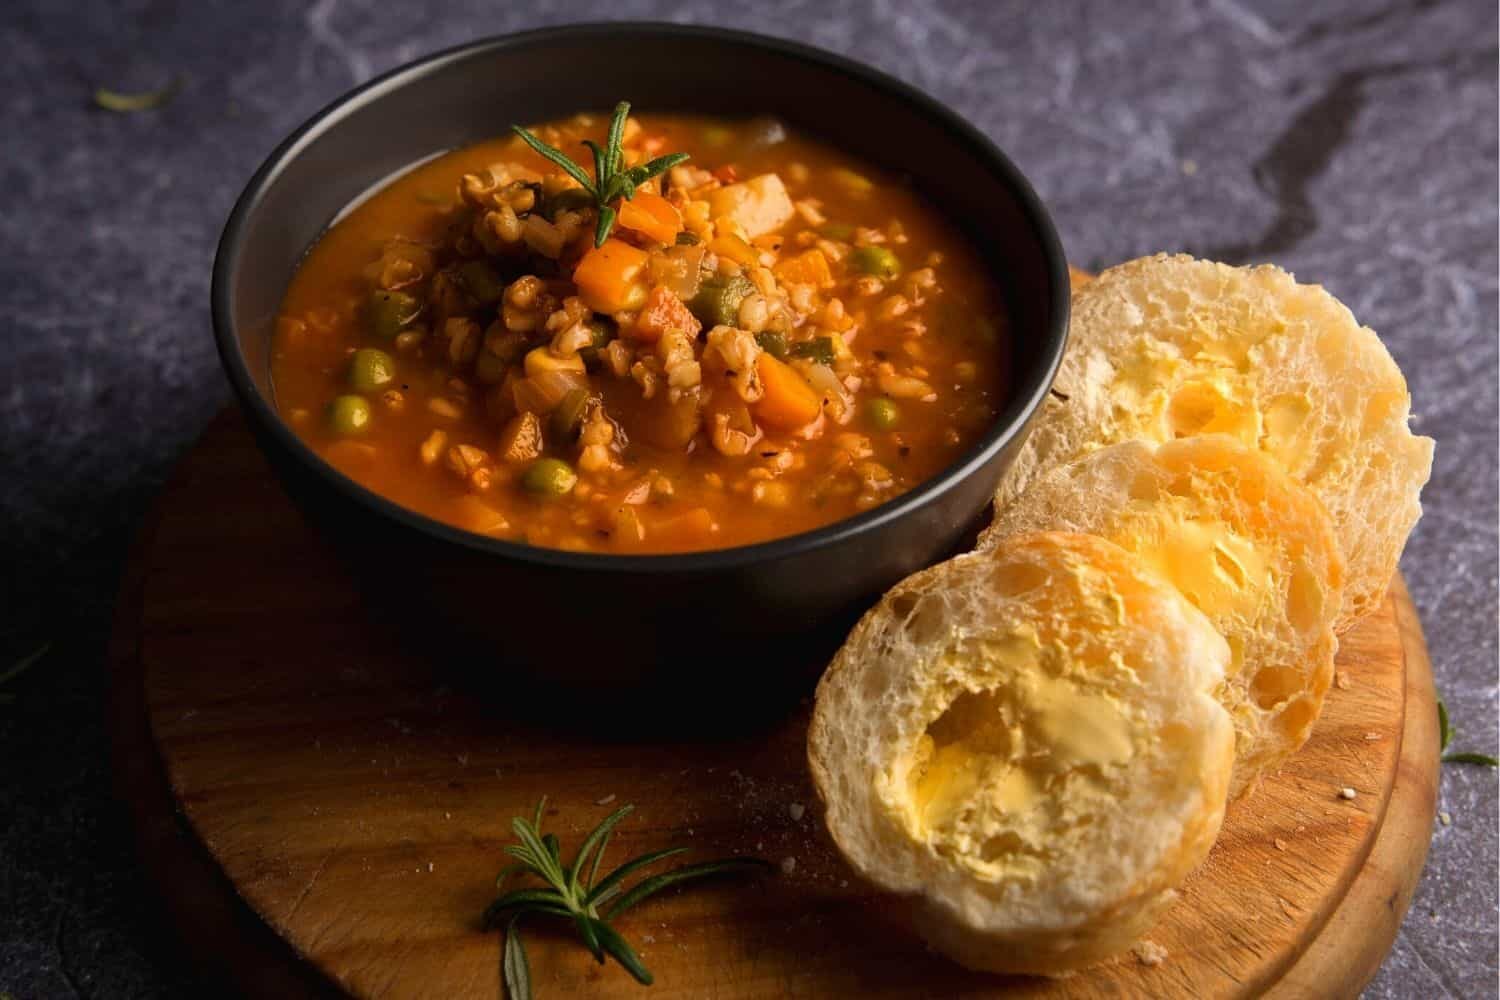 Hearty Veg & Barley Soup with Freshly Baked Bread